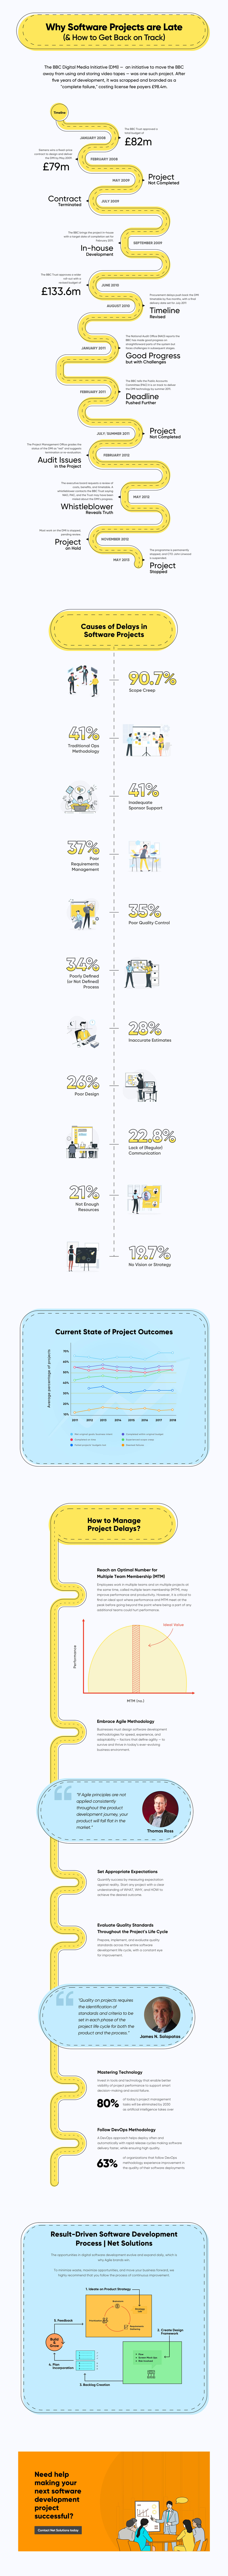 Why software projects are late - infographic